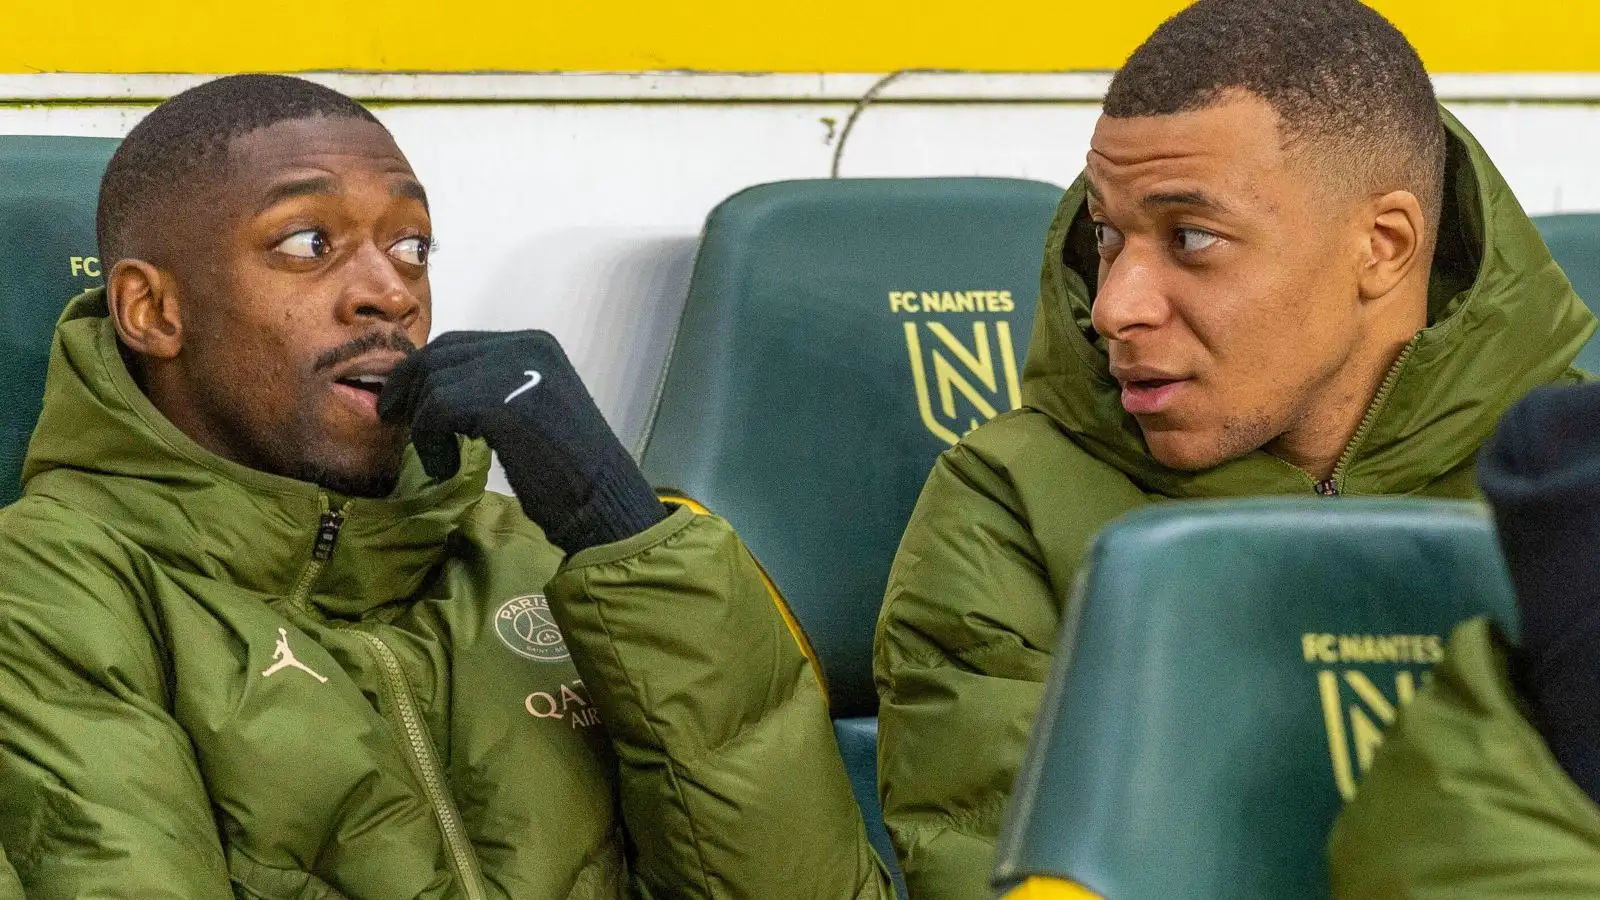 PSG forwards Kylian Mbappe and Ousmane Dembele sat on the bench.